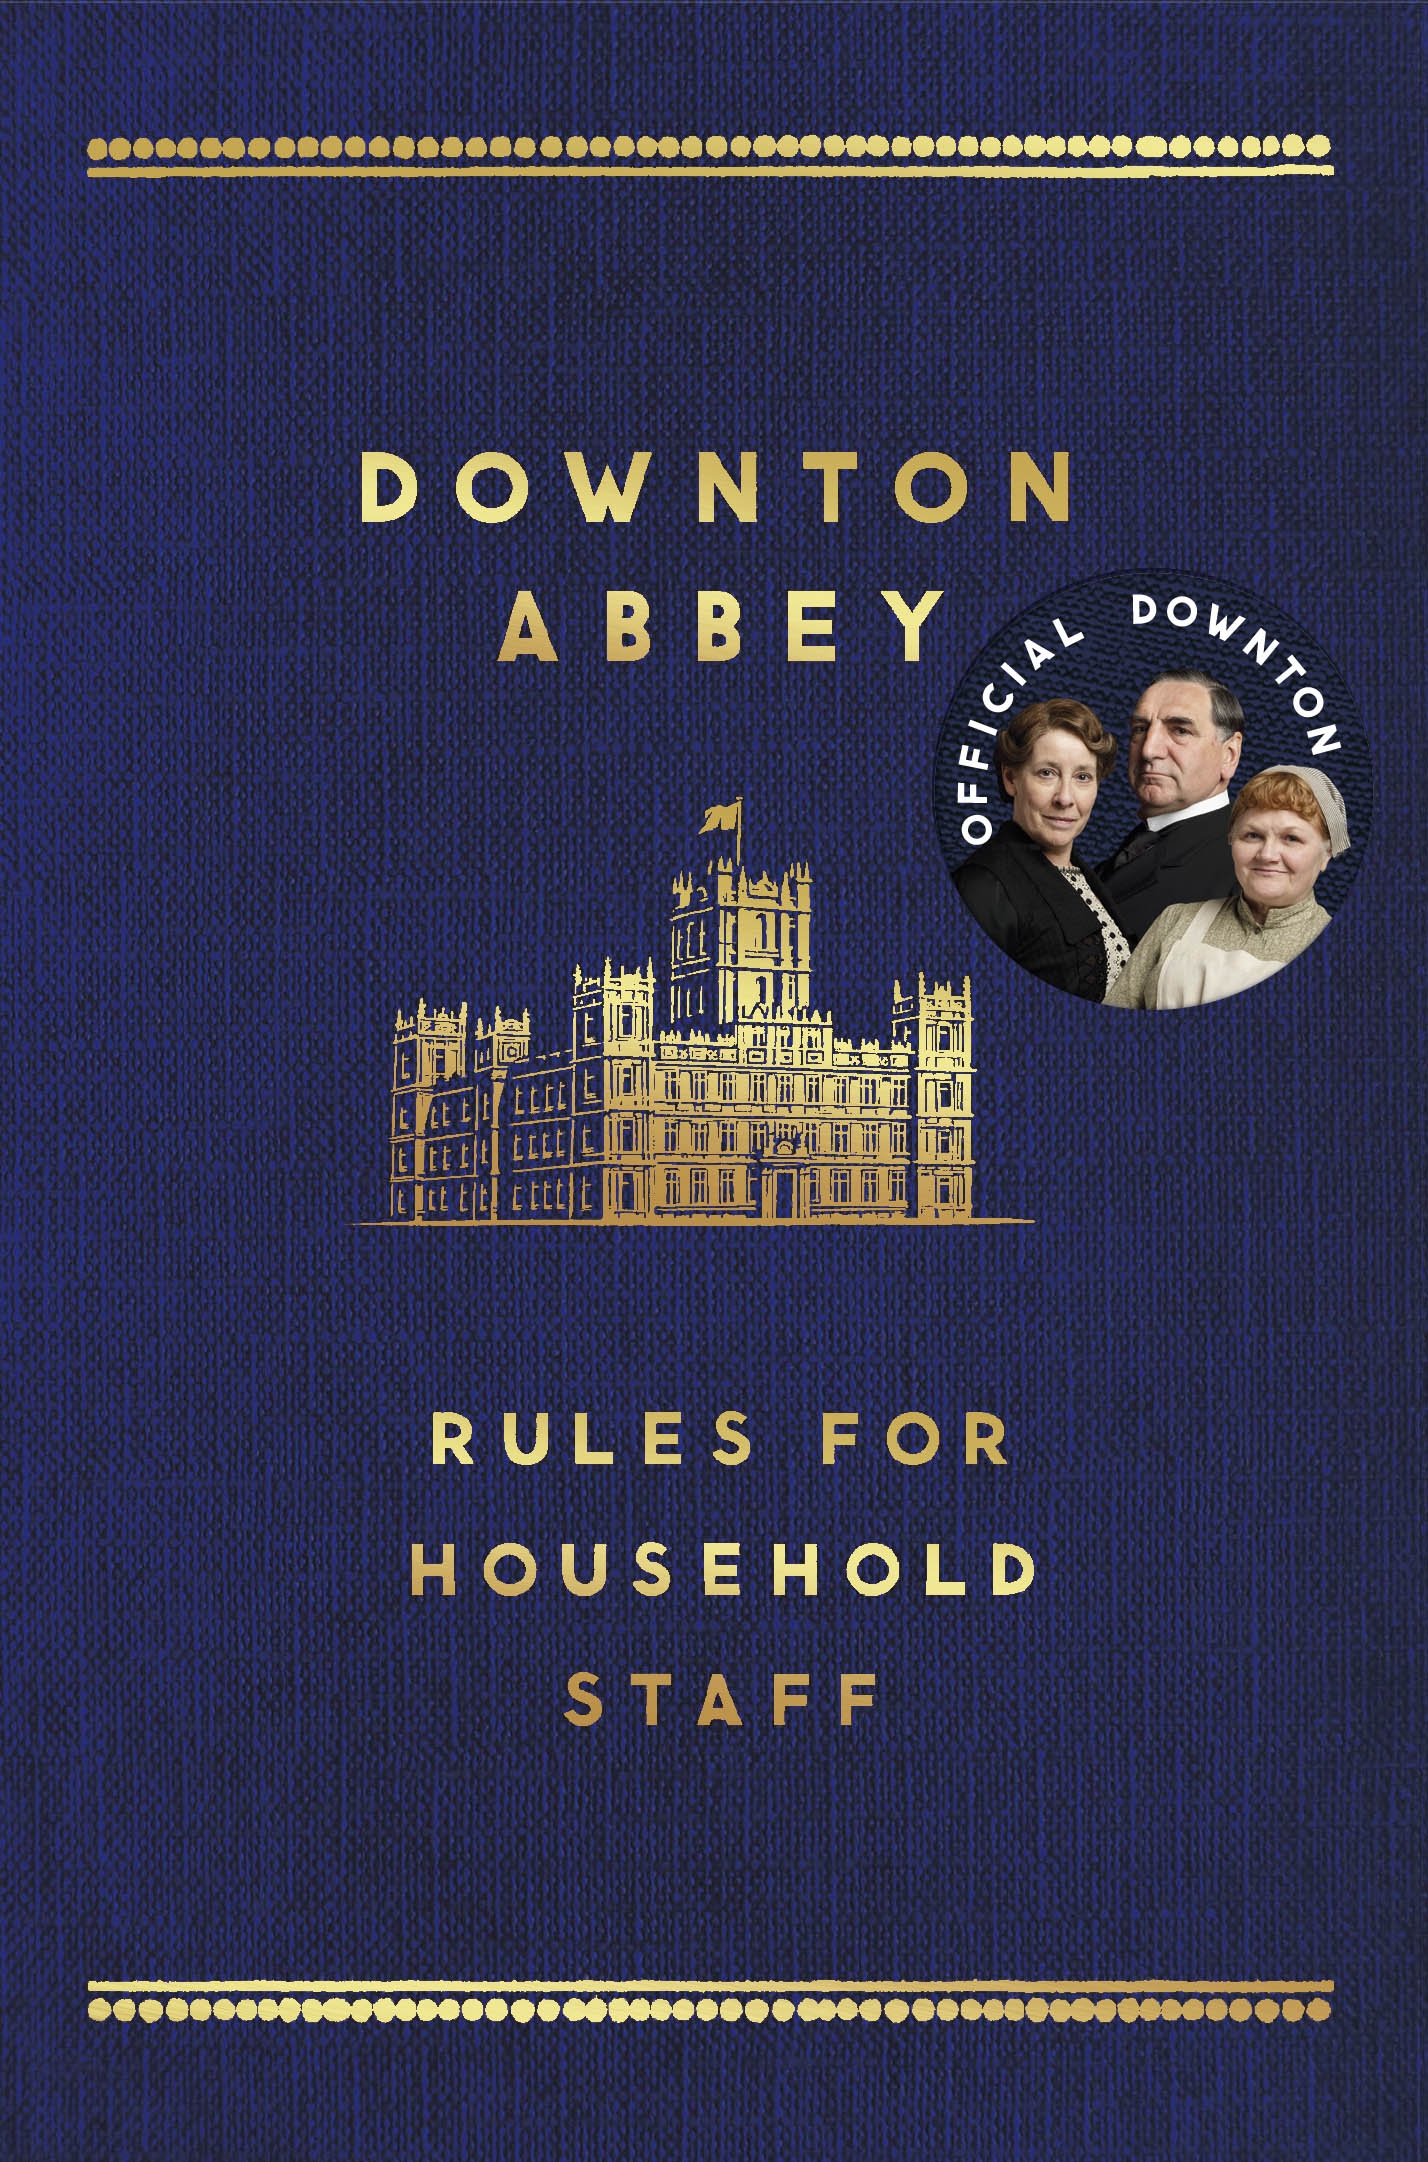 Downton Abbey - Rules for Household Staff